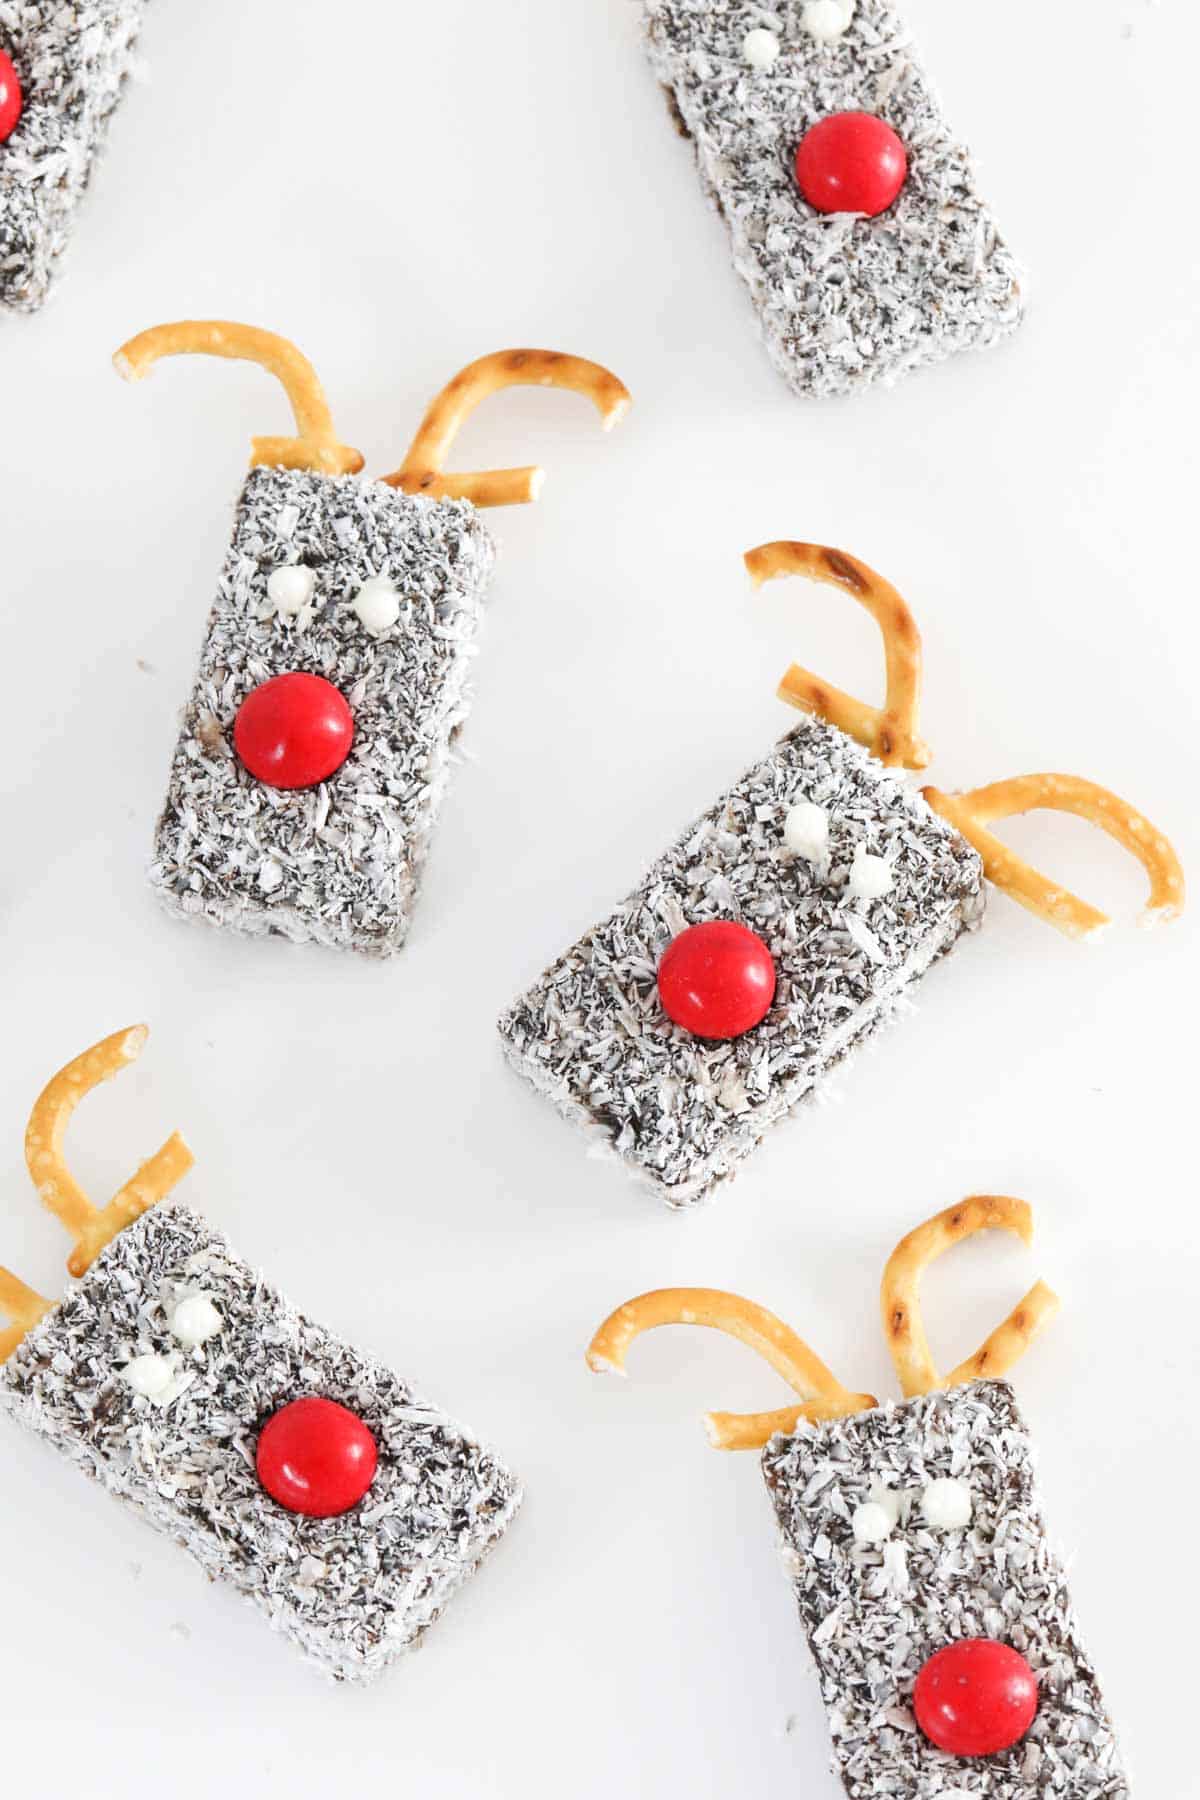 A white background with edible reindeers made out of chocolate and coconut coated sponge fingers.